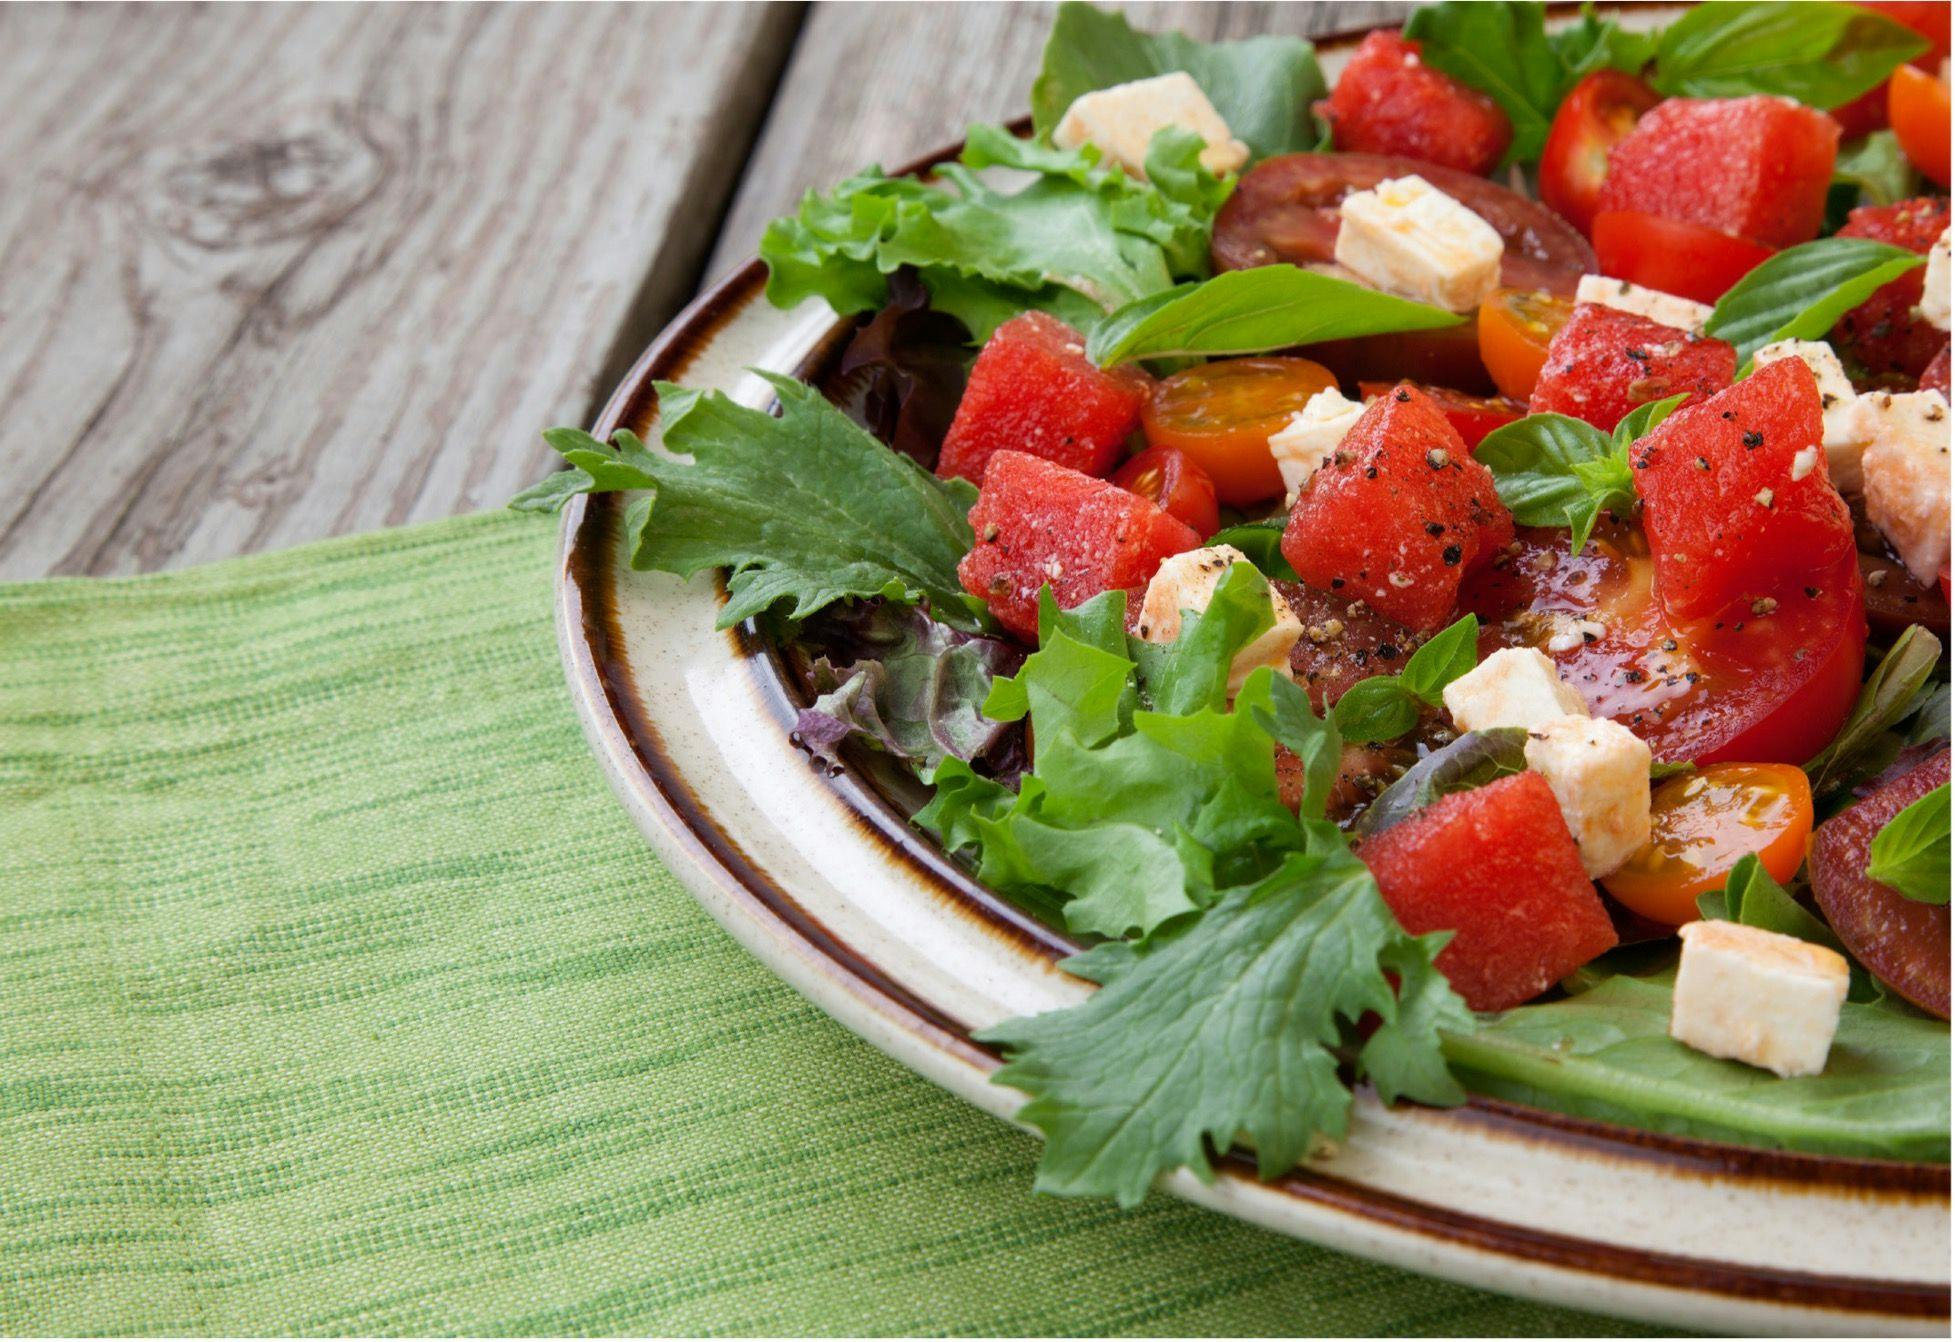 Minty tomato and watermelon salad with feta